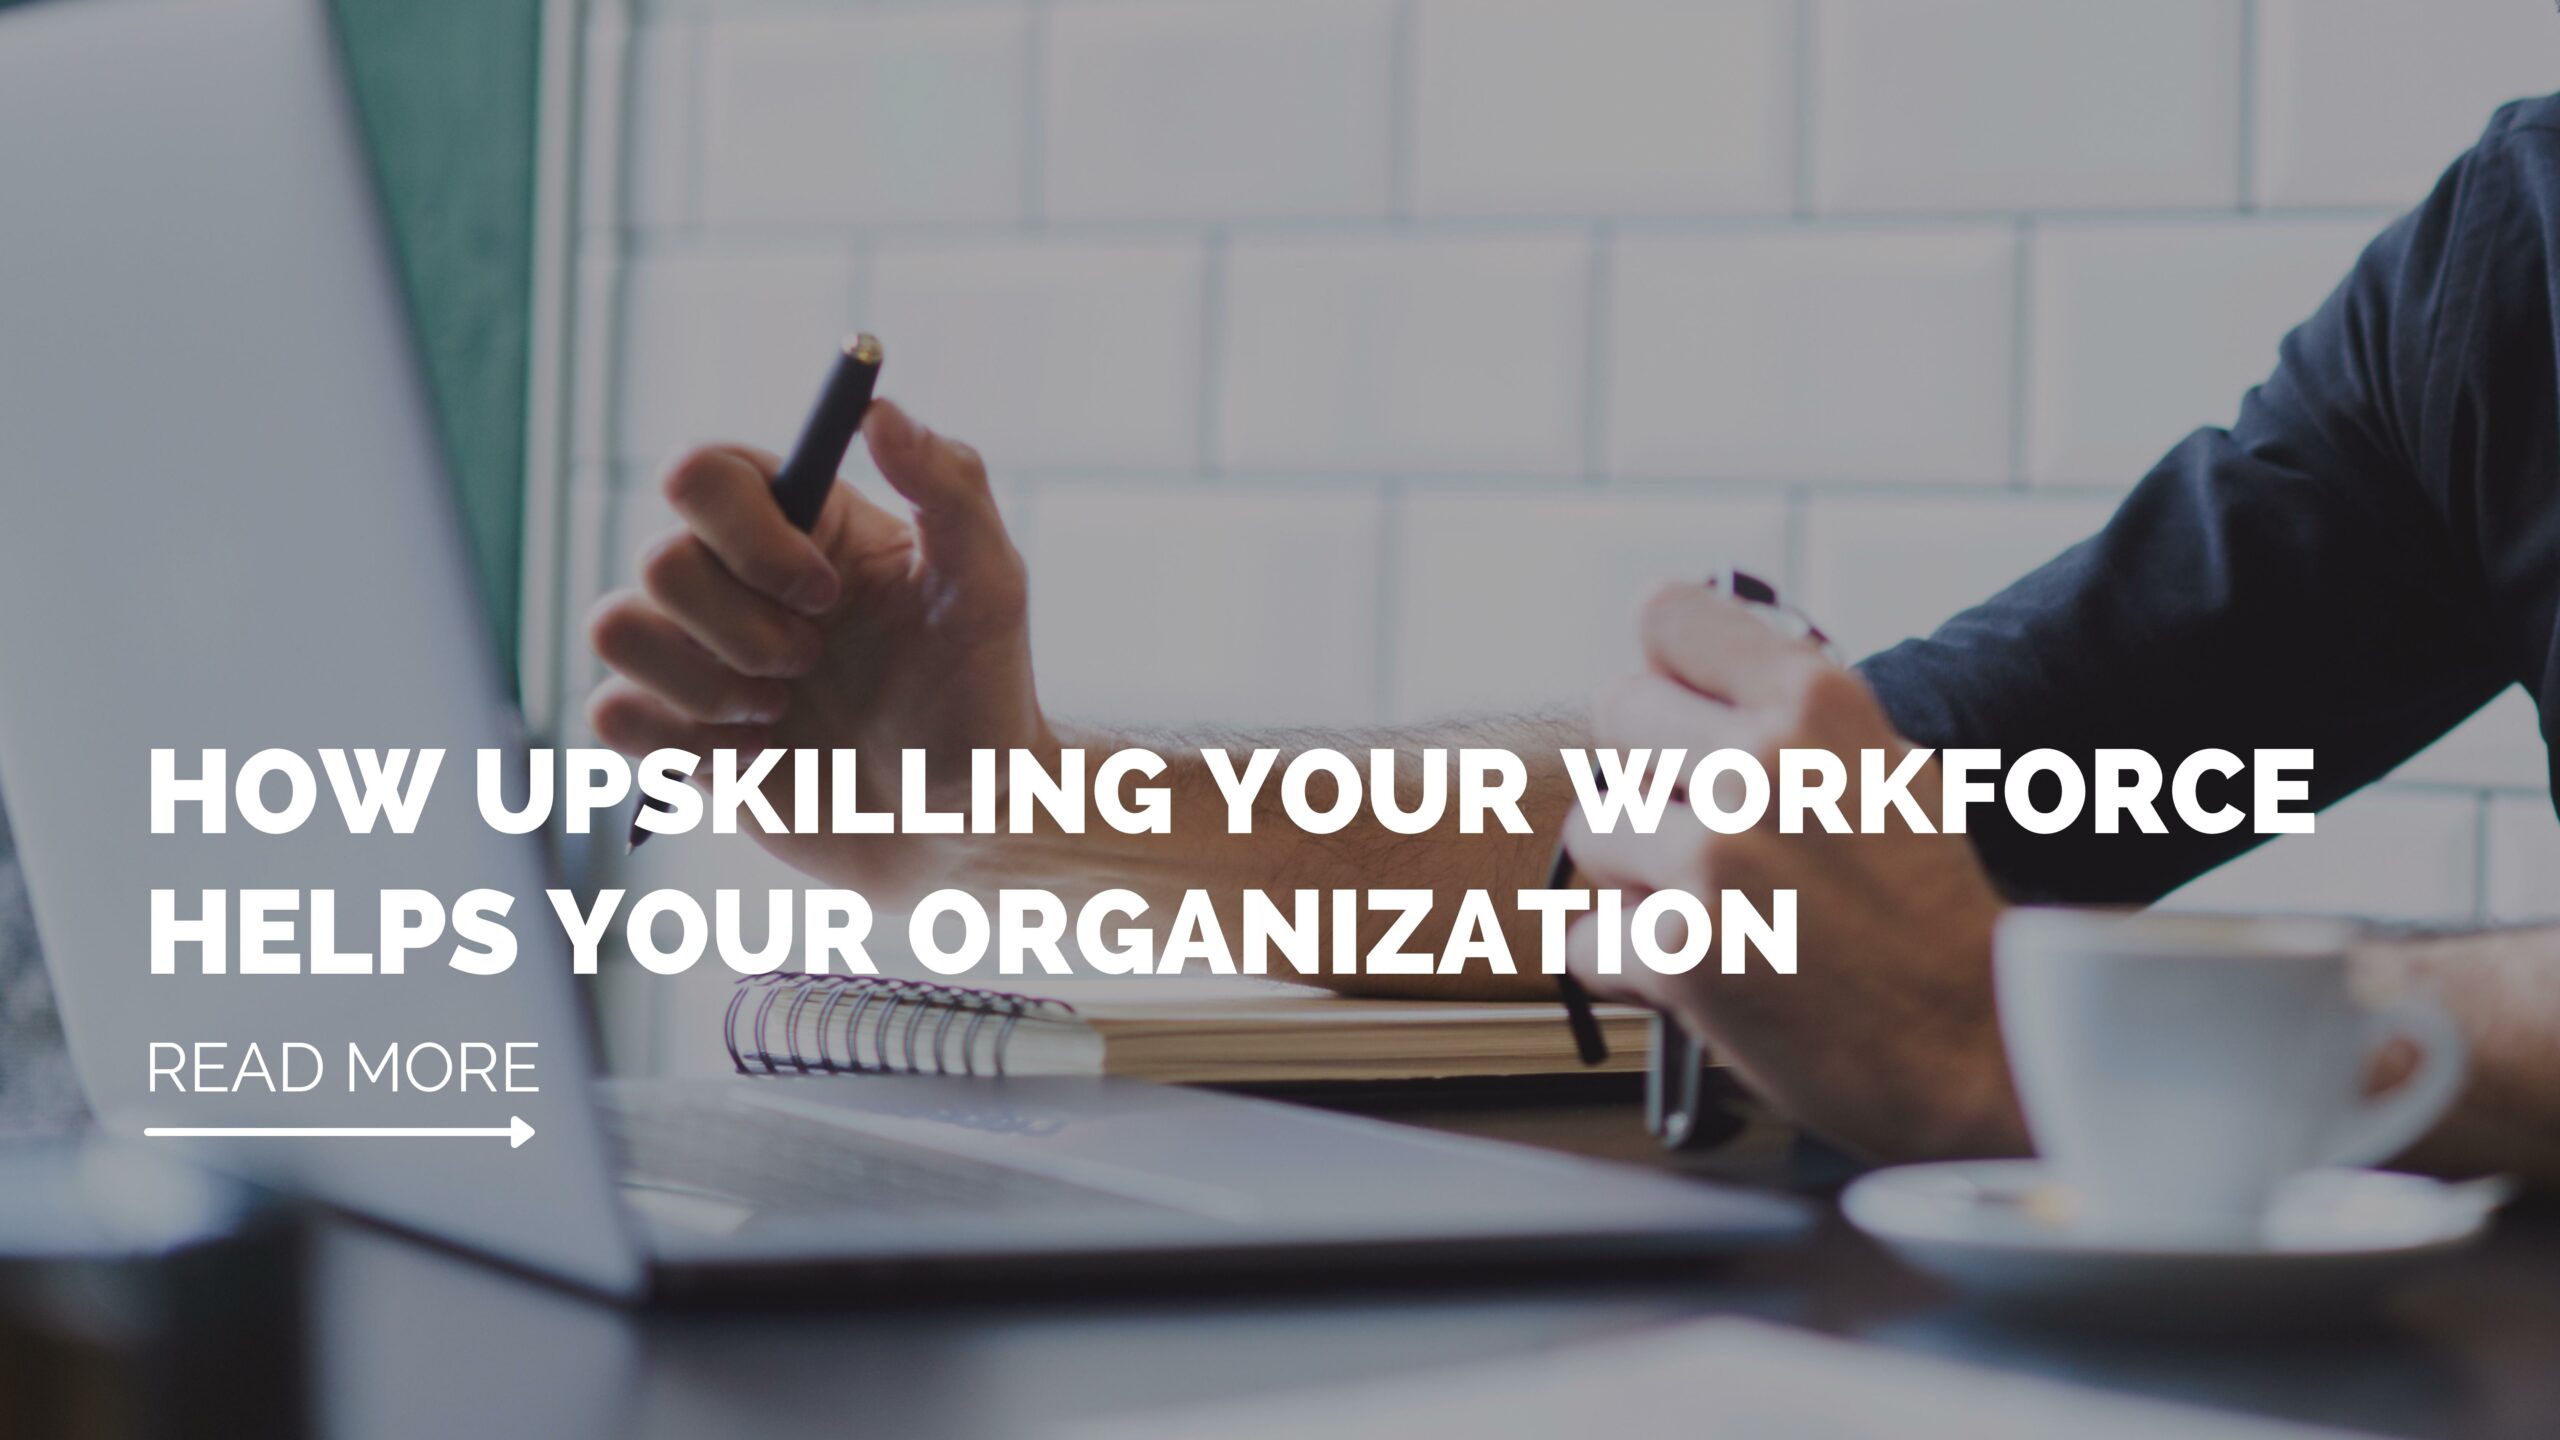 How upskilling helps your organization ITJ